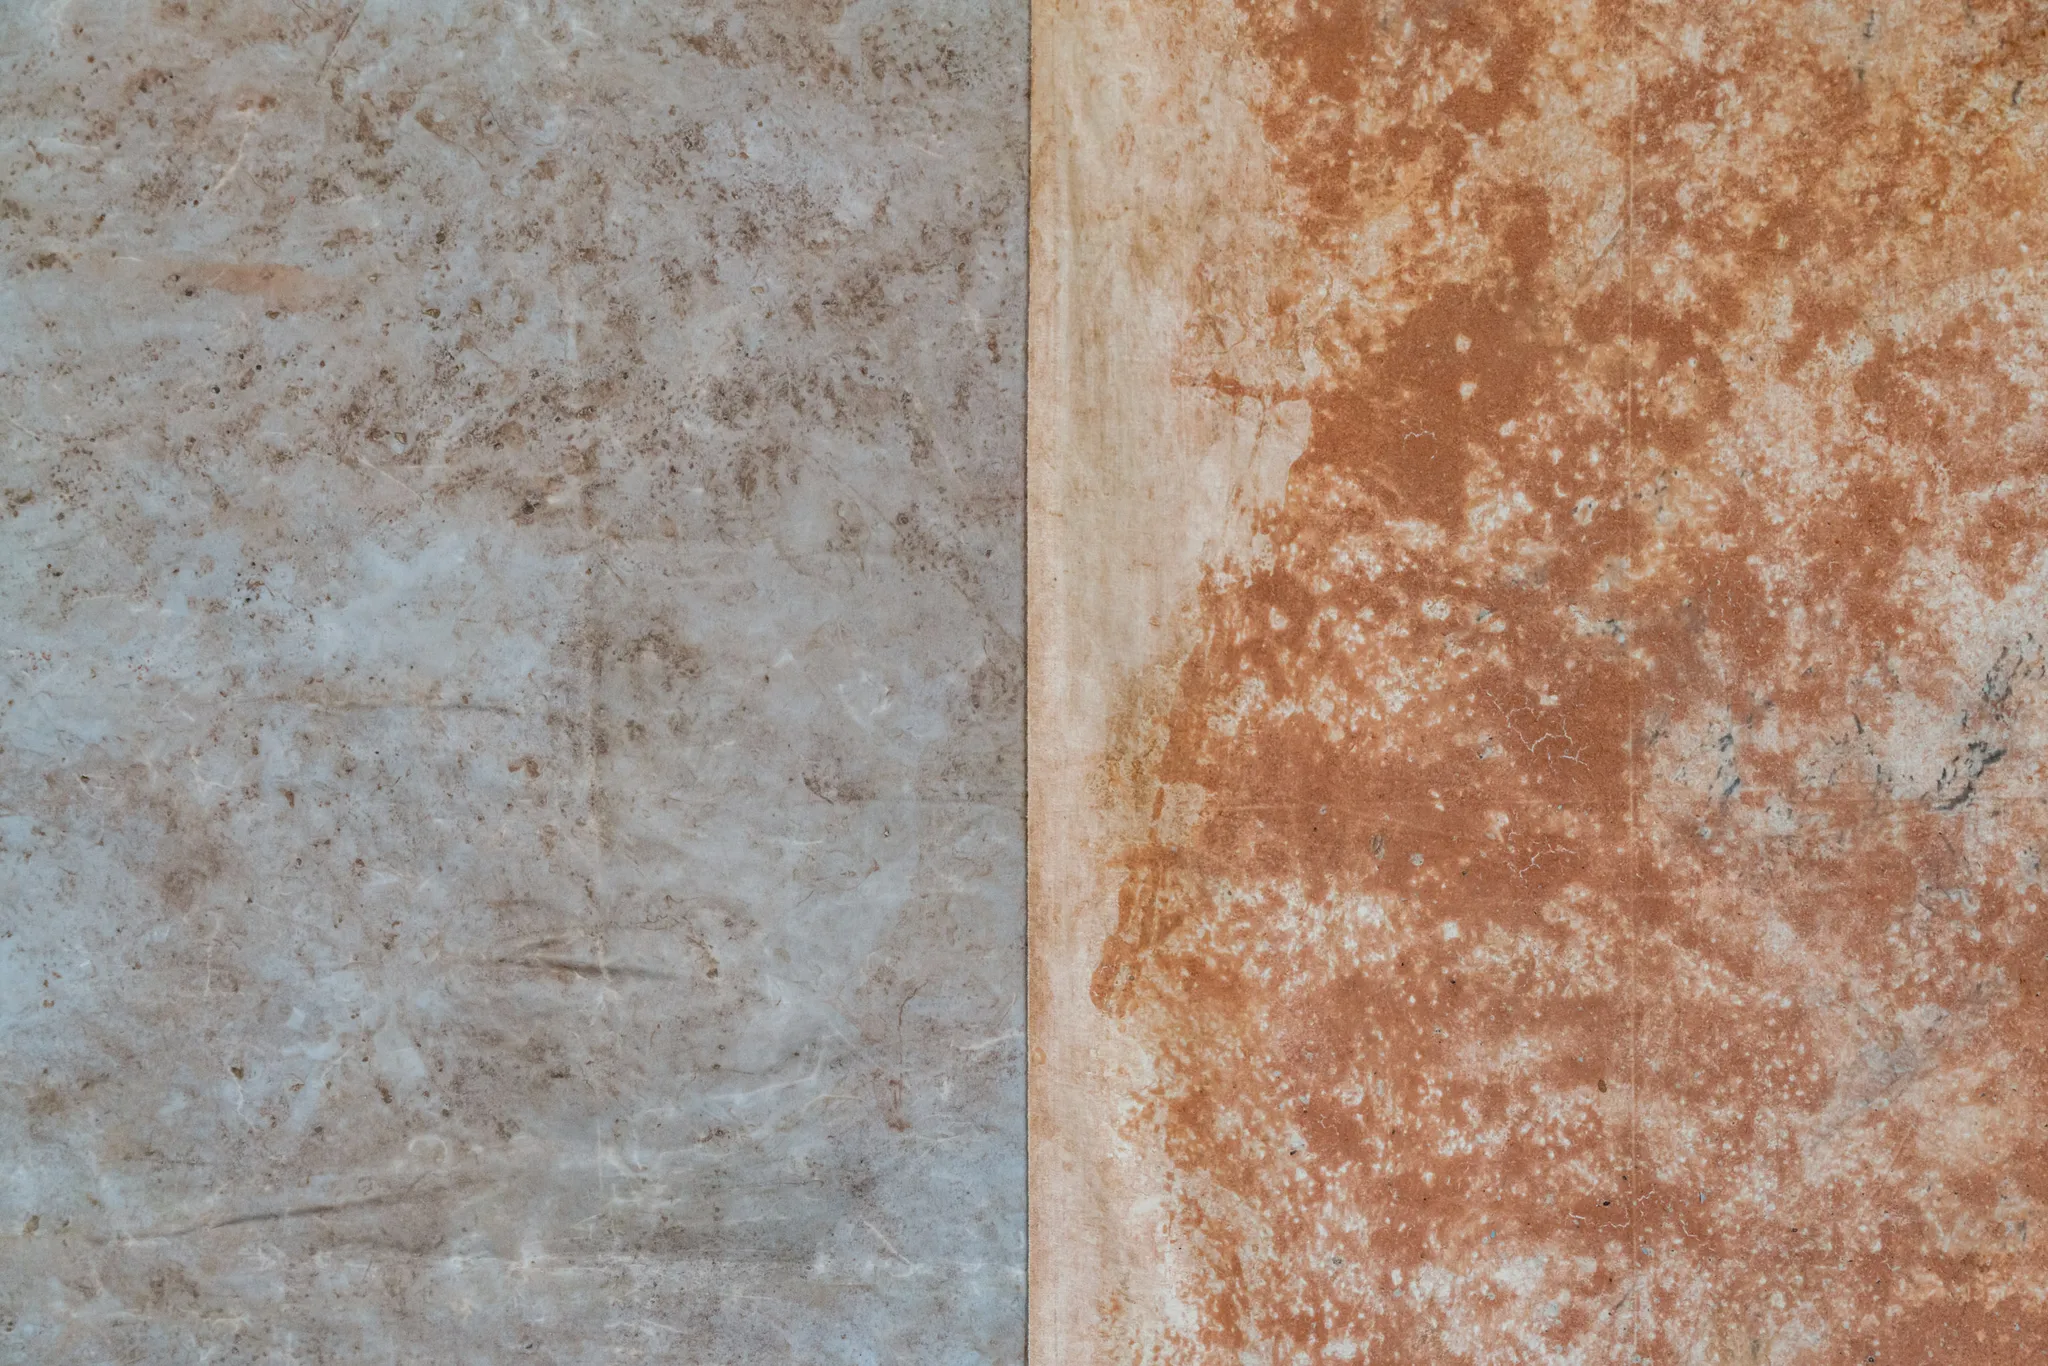 Close-up of the canvas: on the left side, a range of dark grey/brown tones, while on the right, shades of orange/brown.